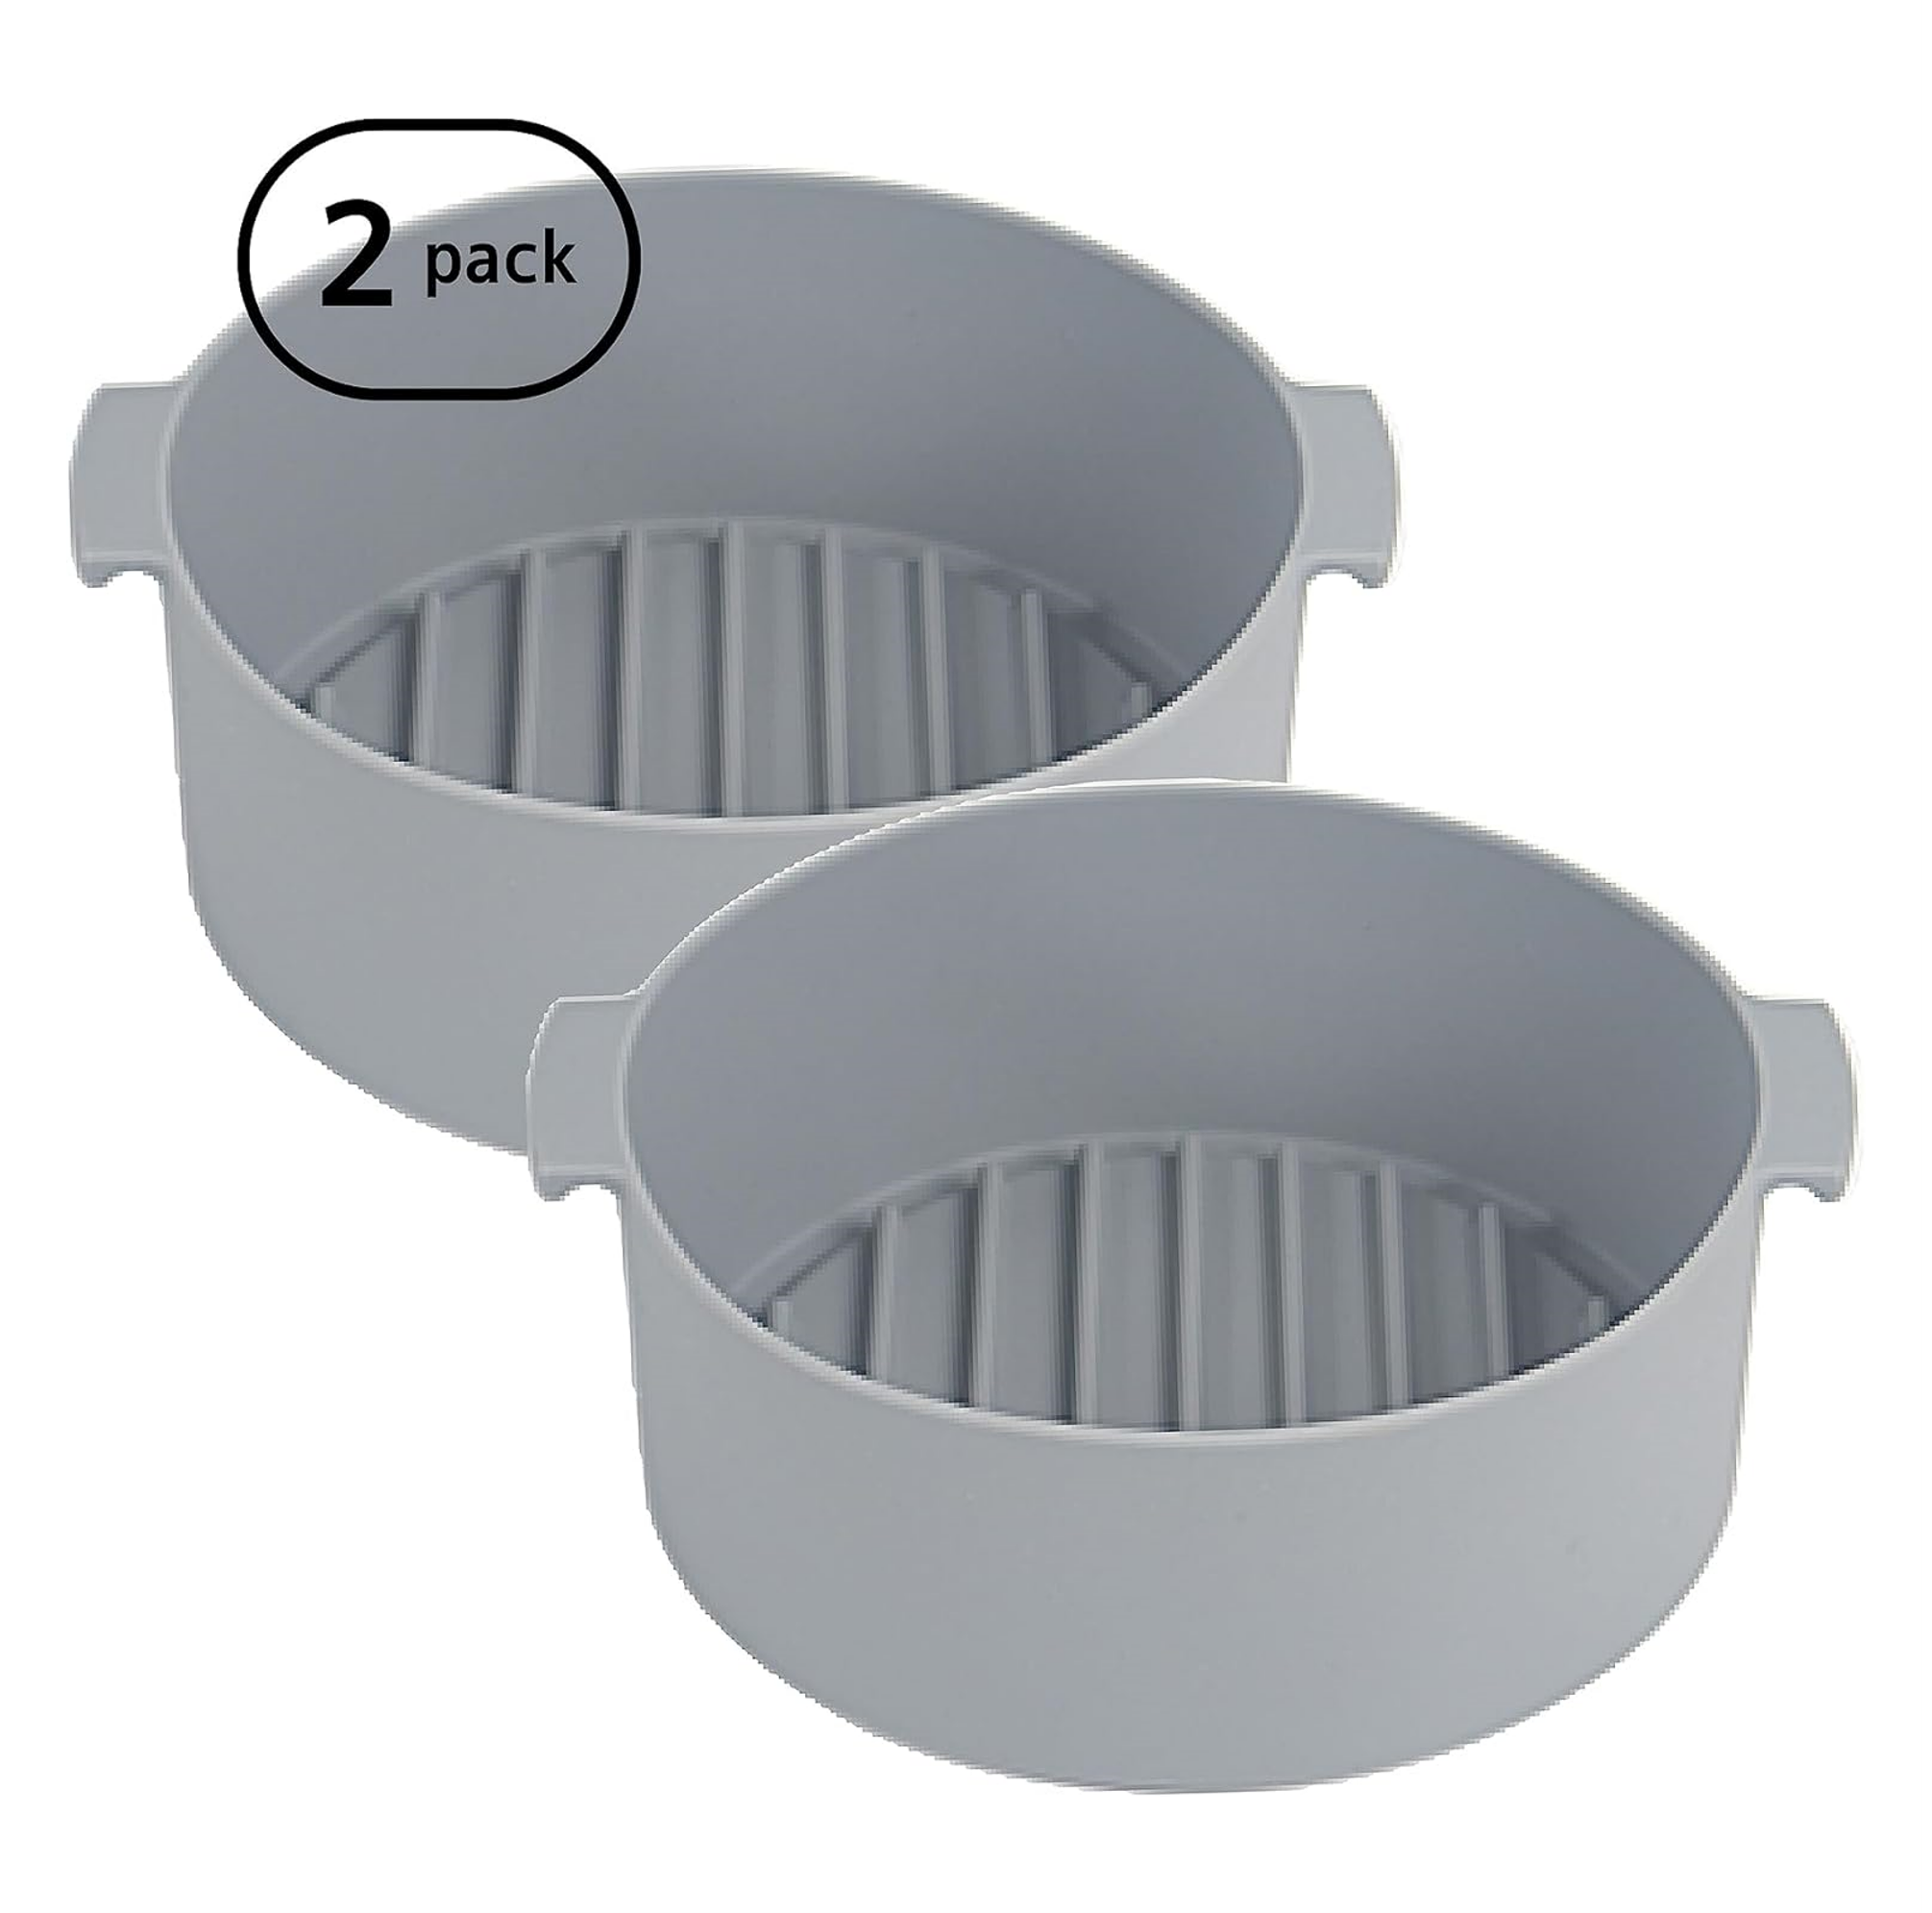 Jovely 7.5 Inch Grey Silicone Air Fryer 2 Pack